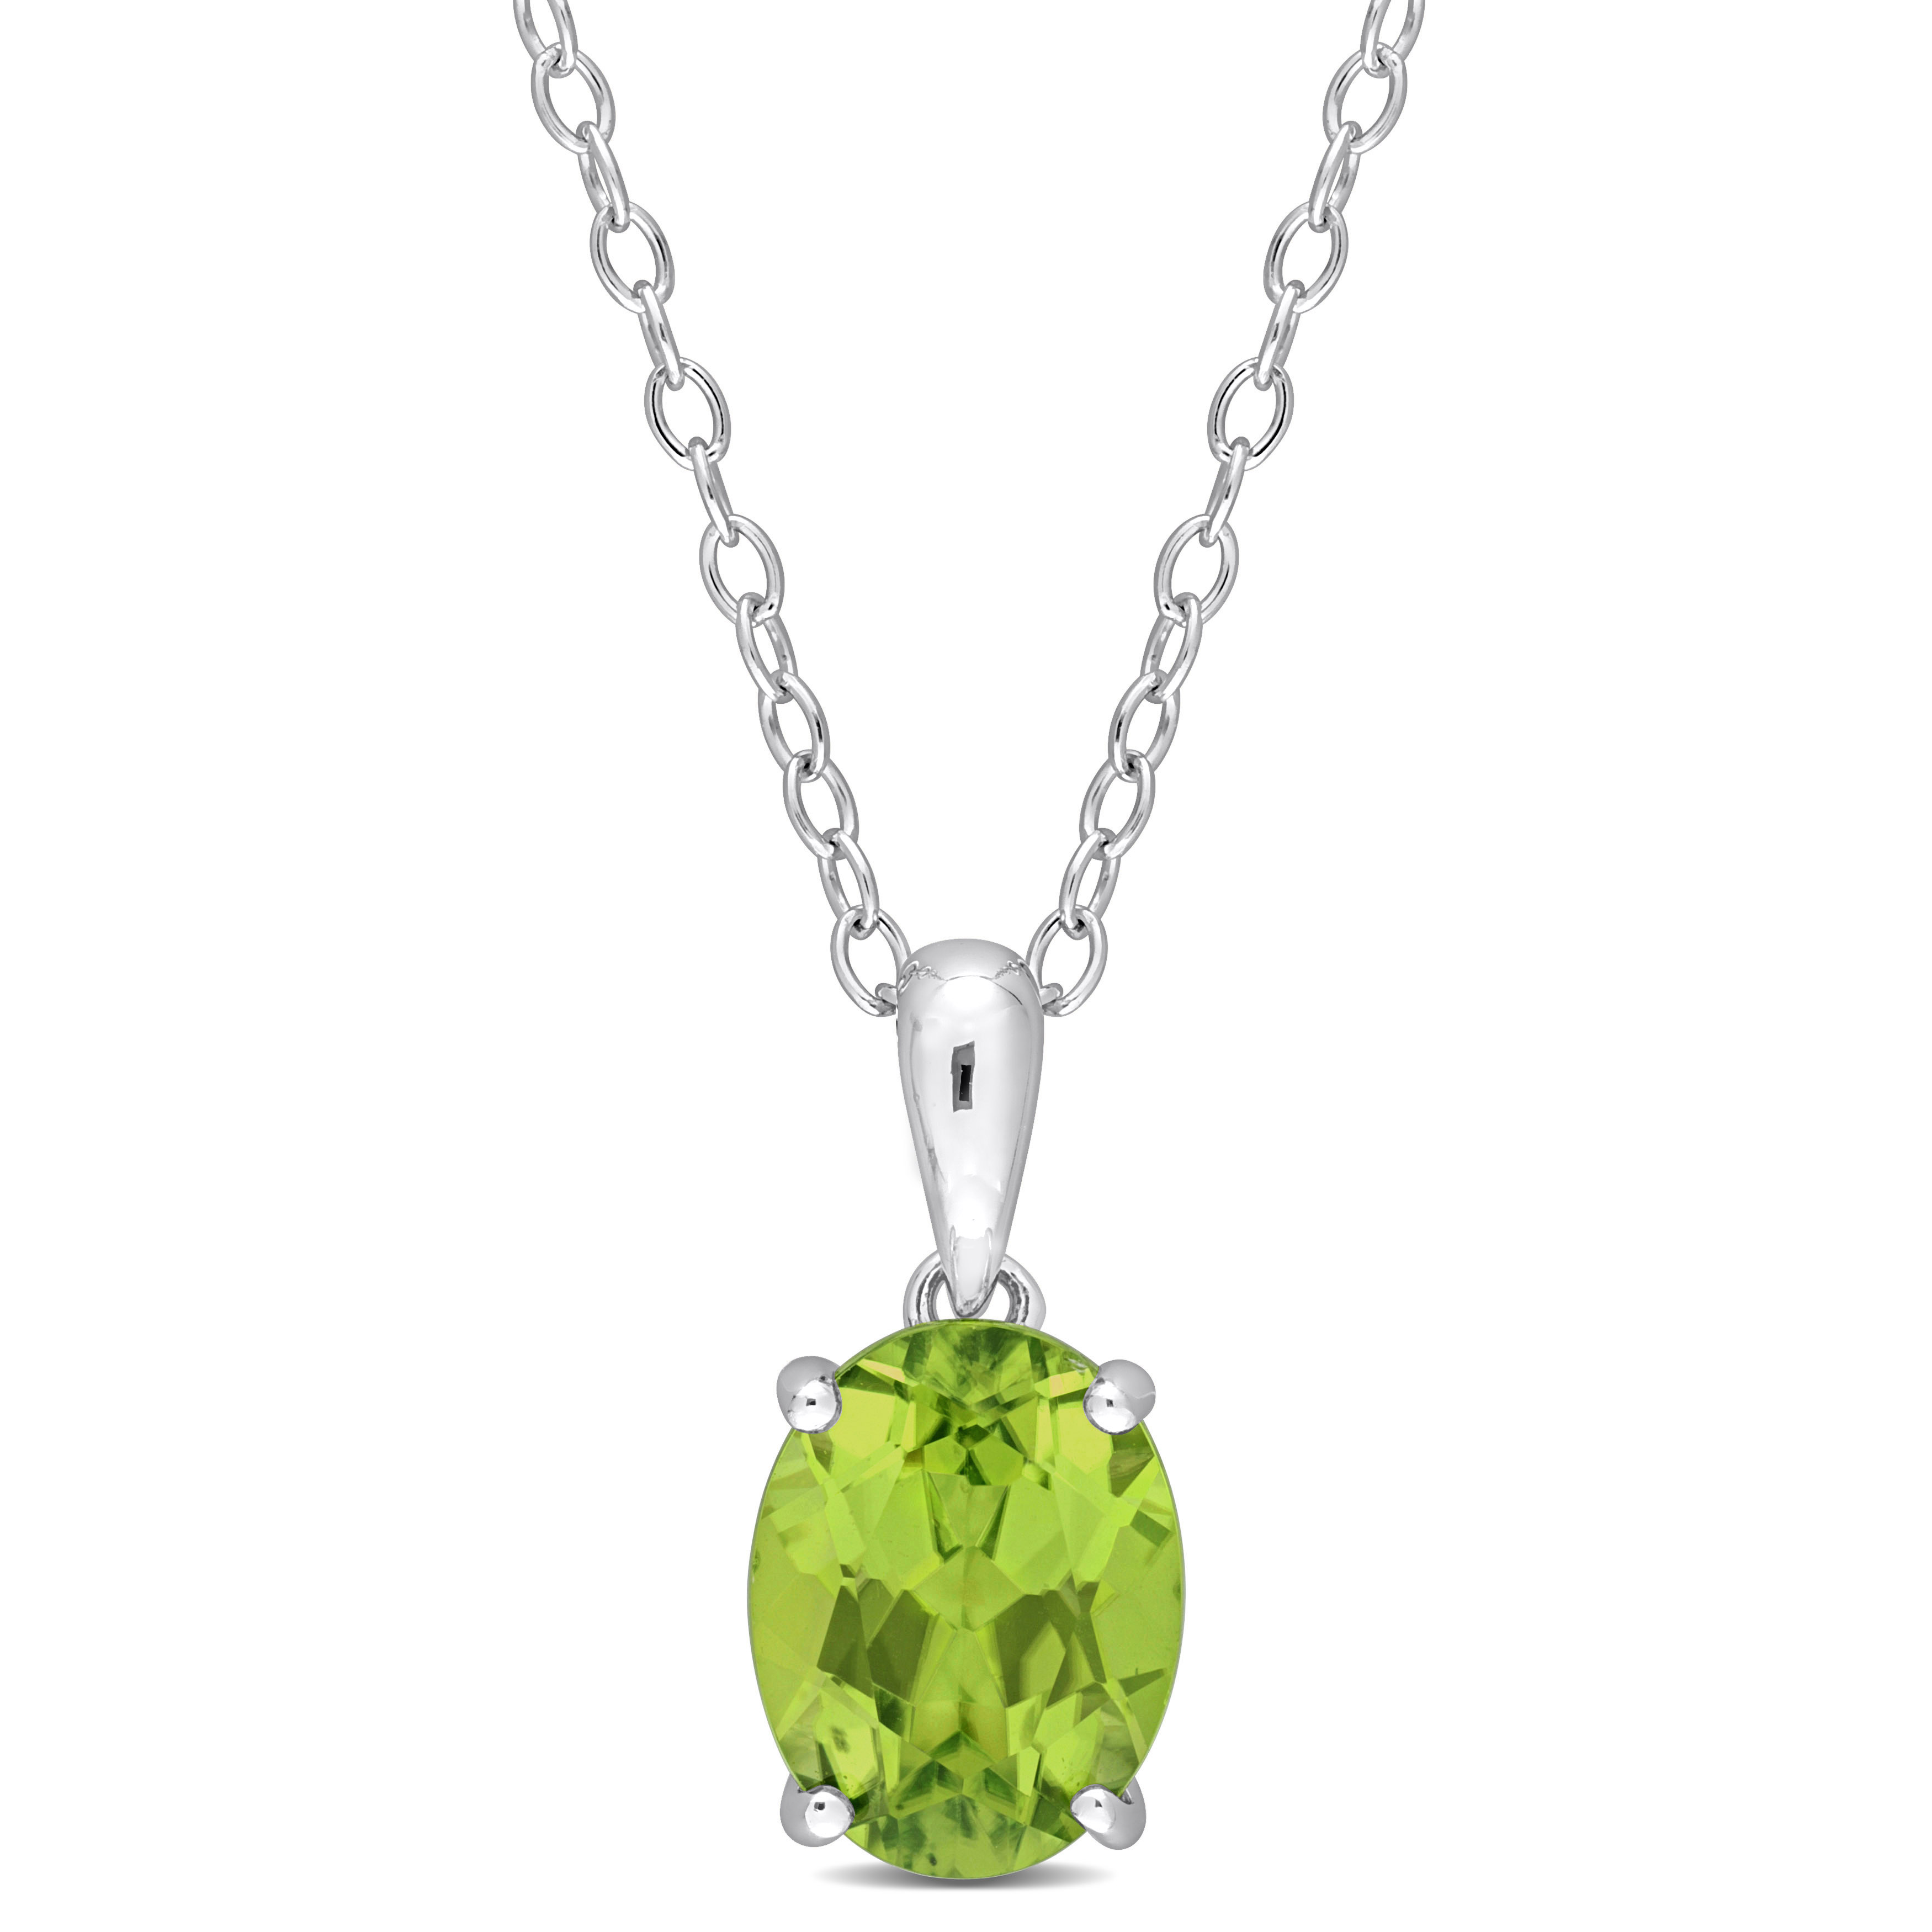 1 7/8 CT TGW Oval Peridot Solitaire Heart Design Pendant with Chain in Sterling Silver - 18 in.